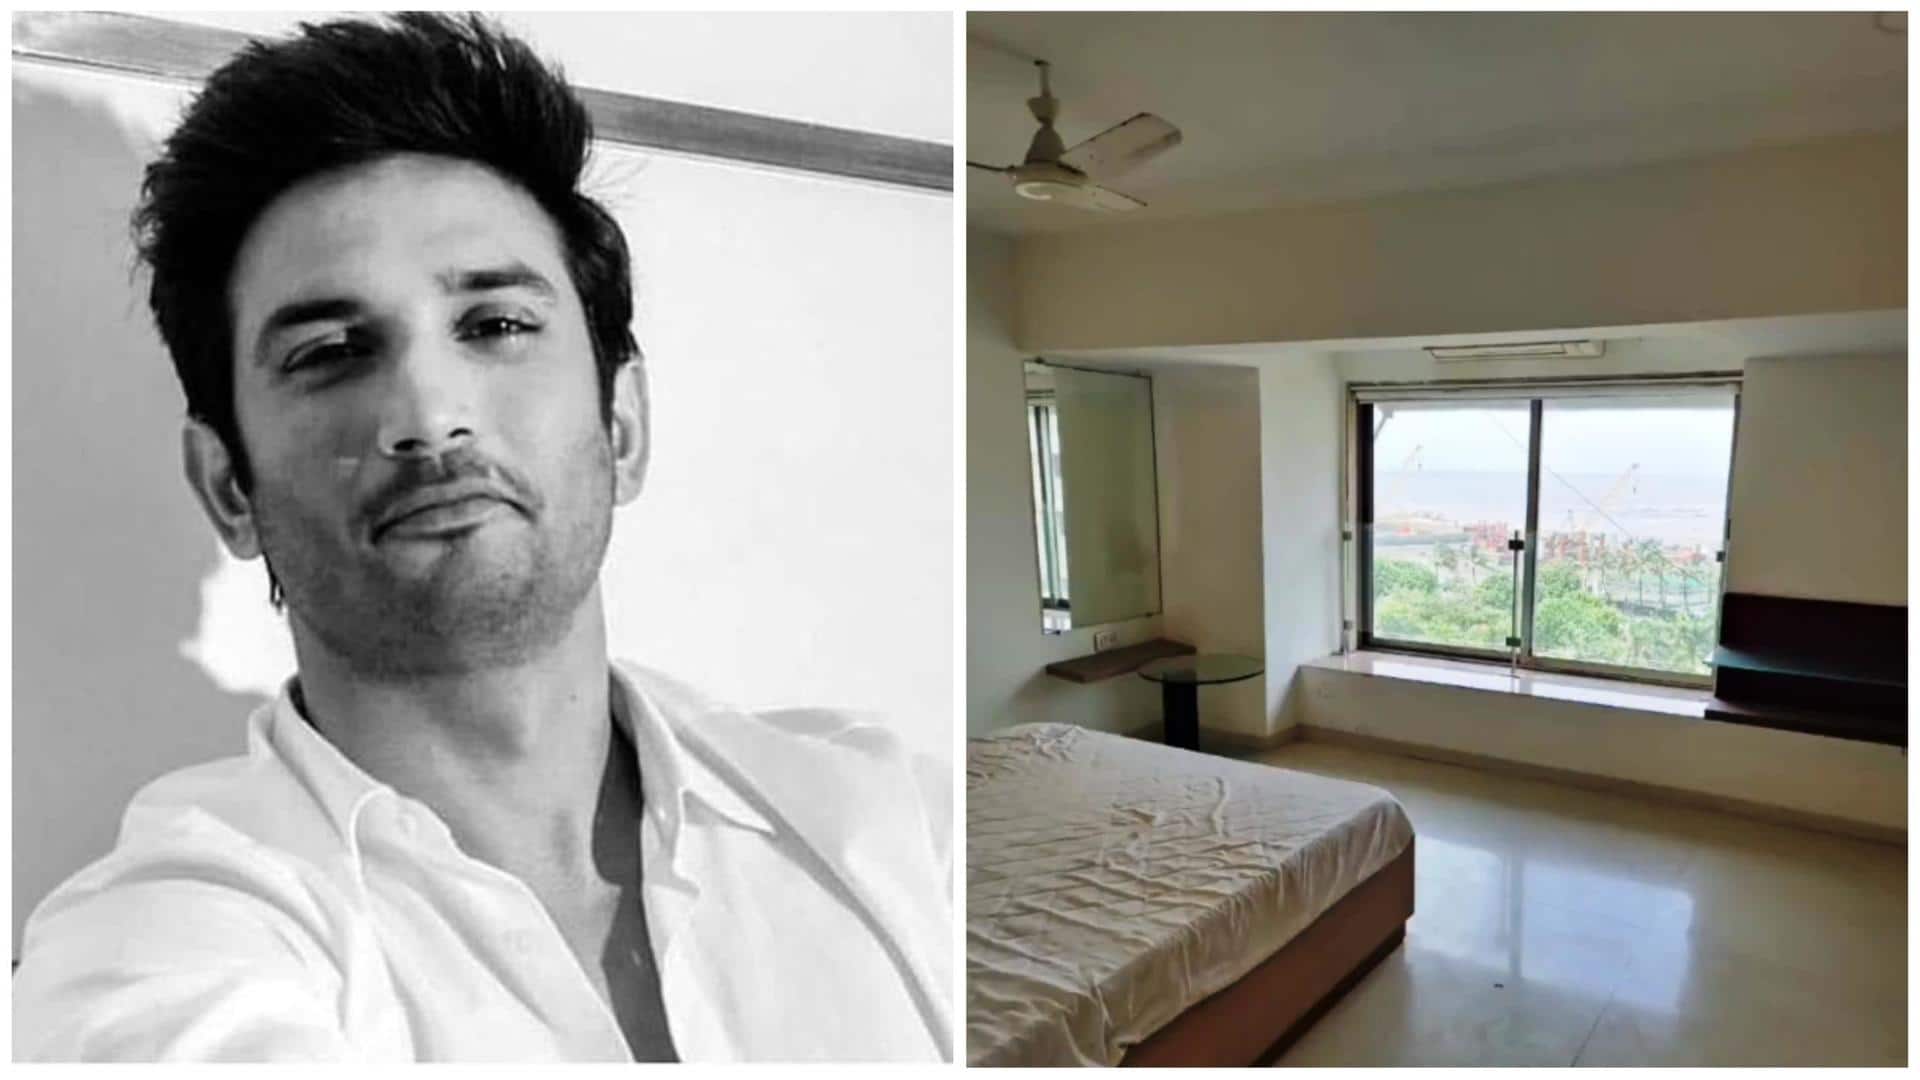 No takers for Mumbai apartment where Sushant Singh Rajput died